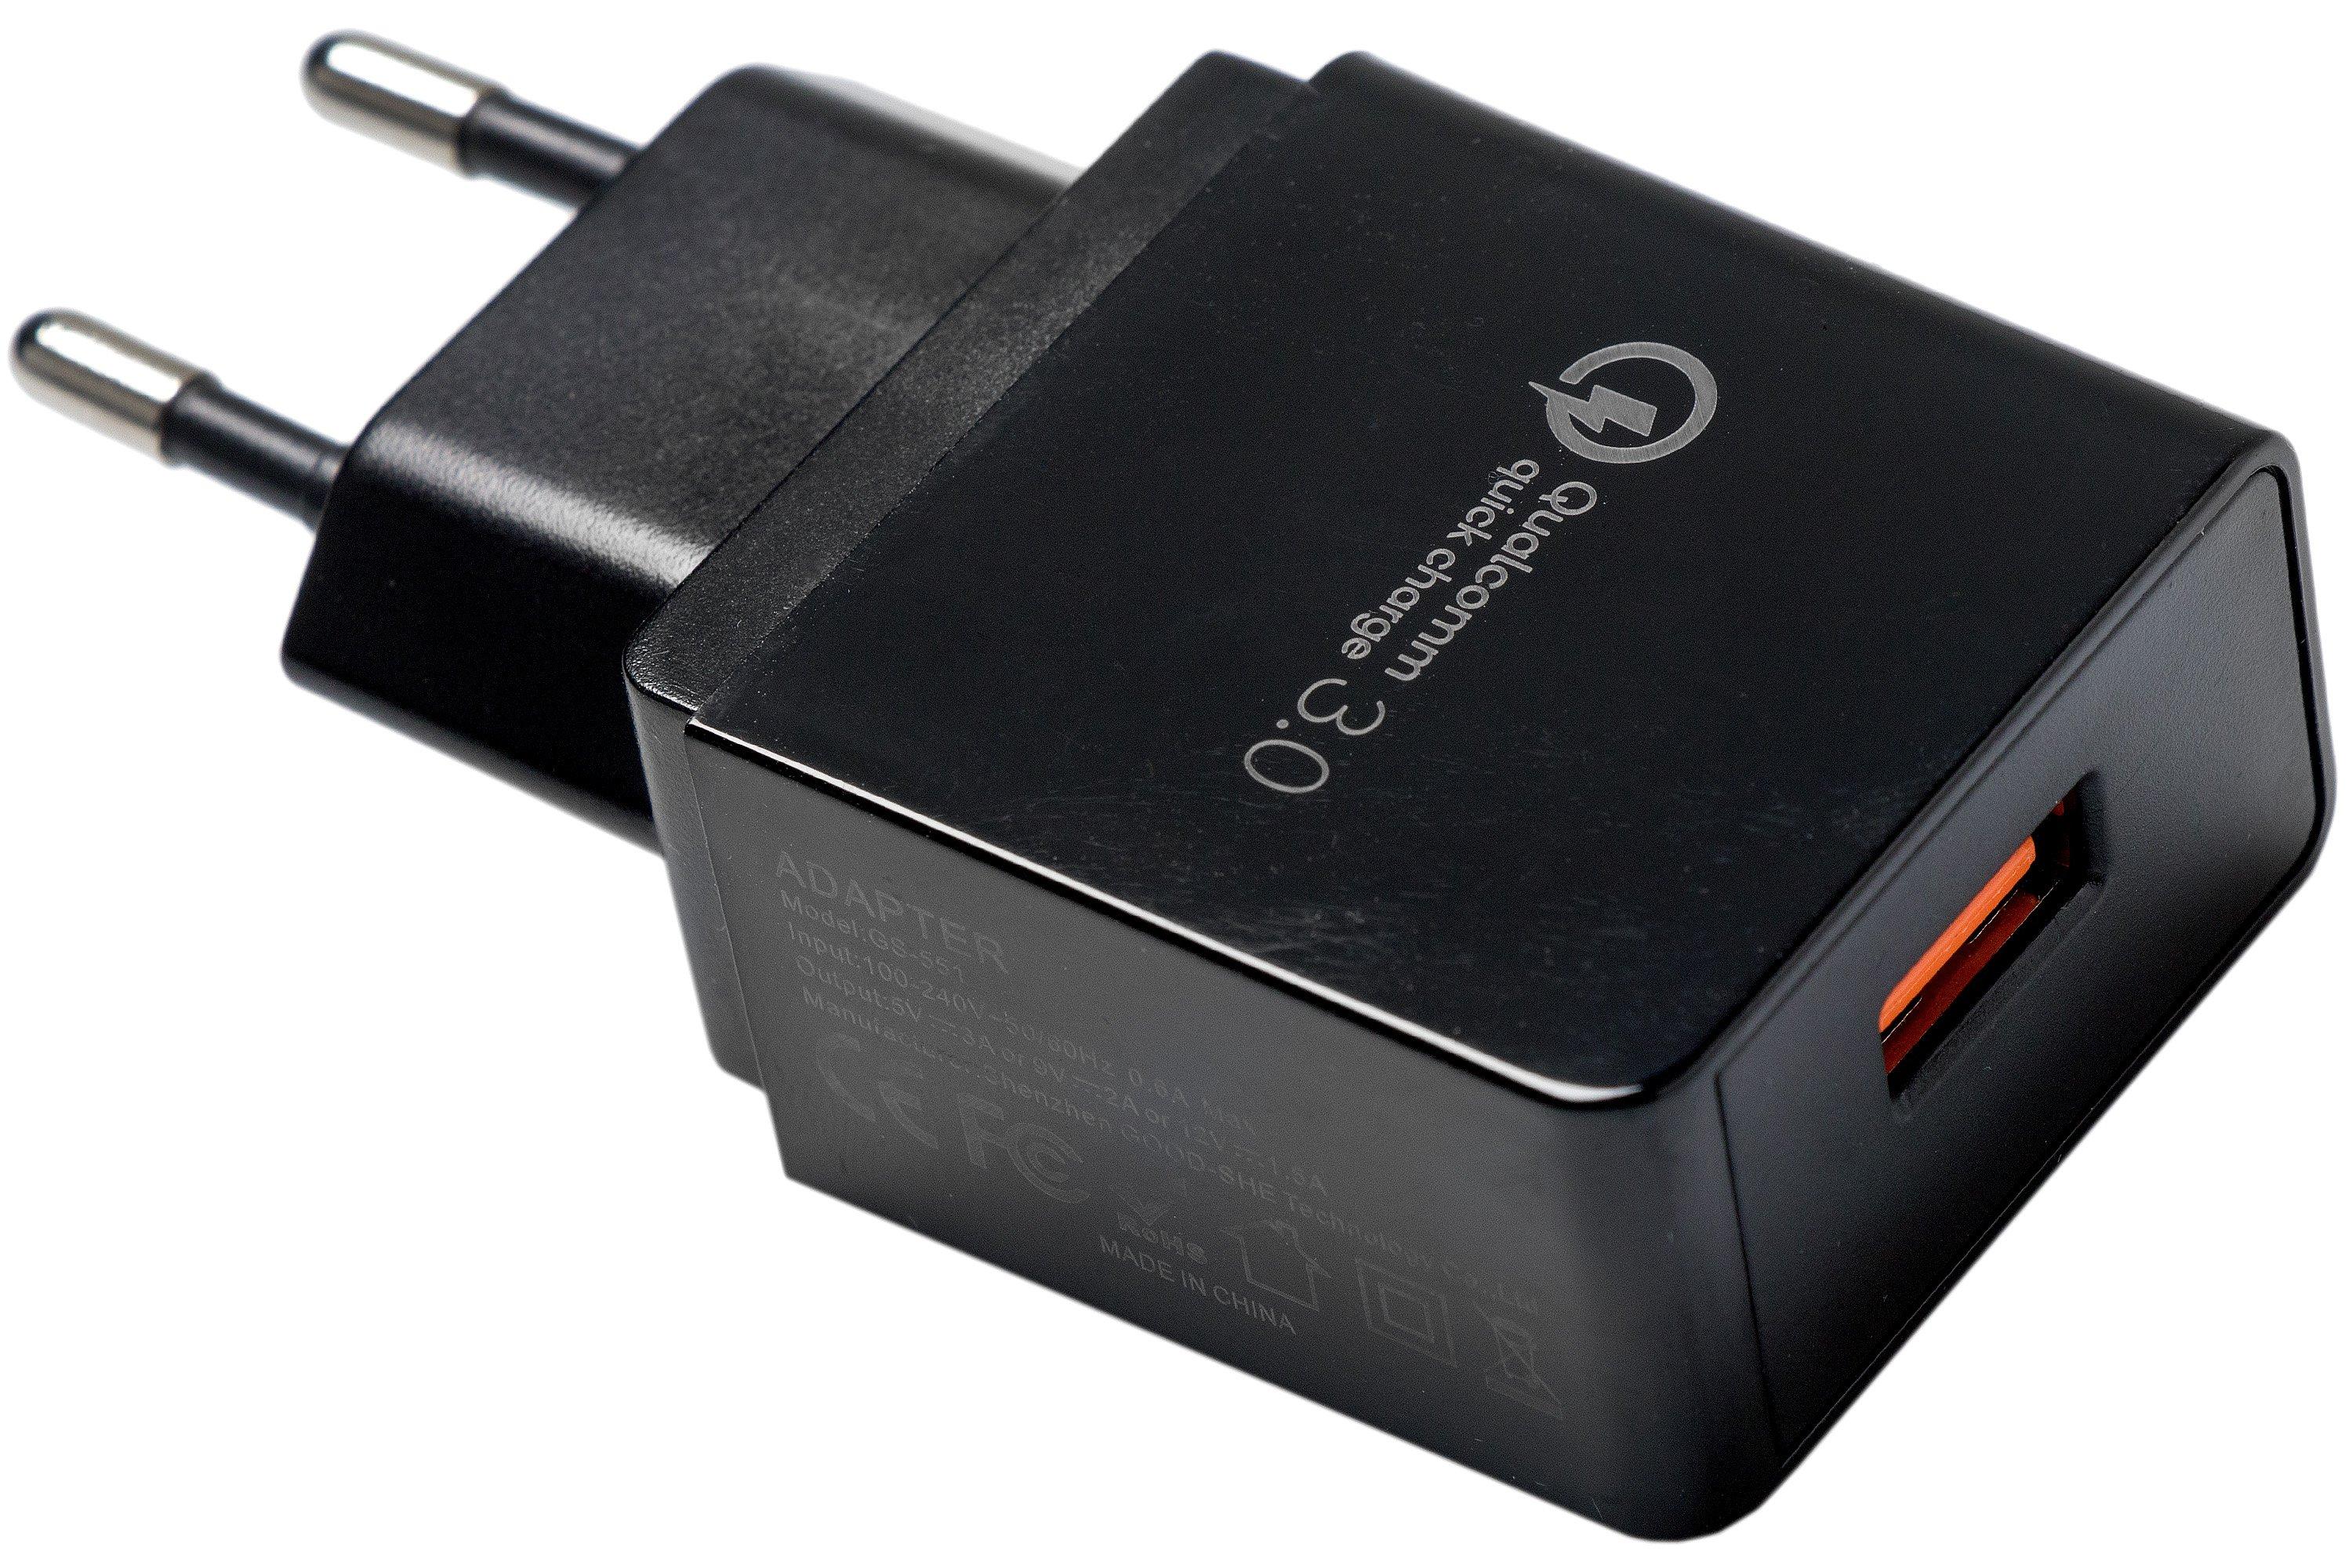 Qualcomm QC 3.0 usb-adapter  Advantageously shopping at